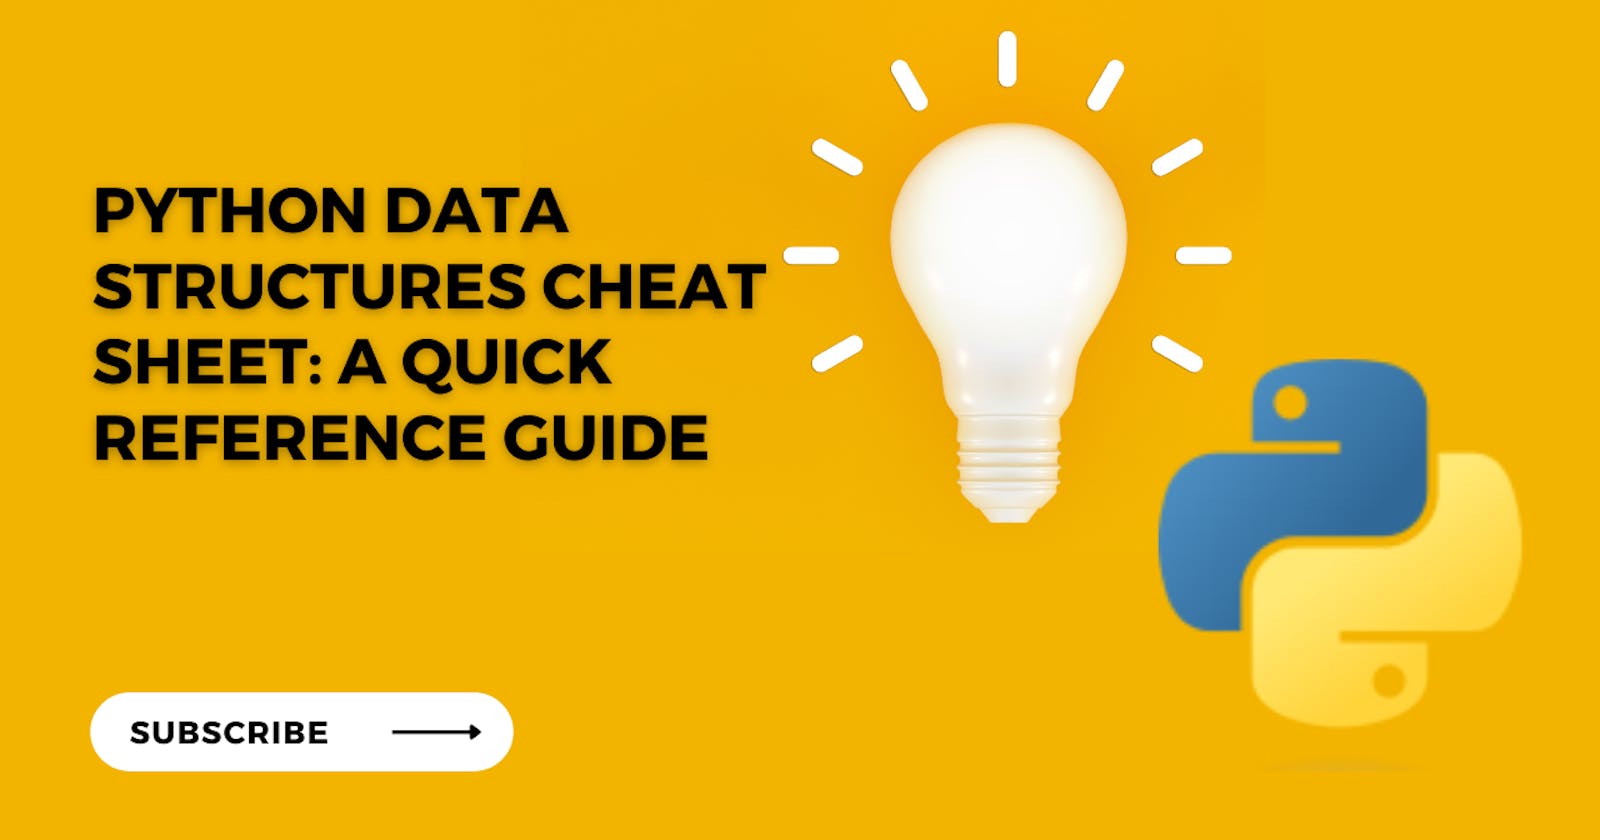 Python Data Structures Cheat Sheet: A Quick Reference Guide